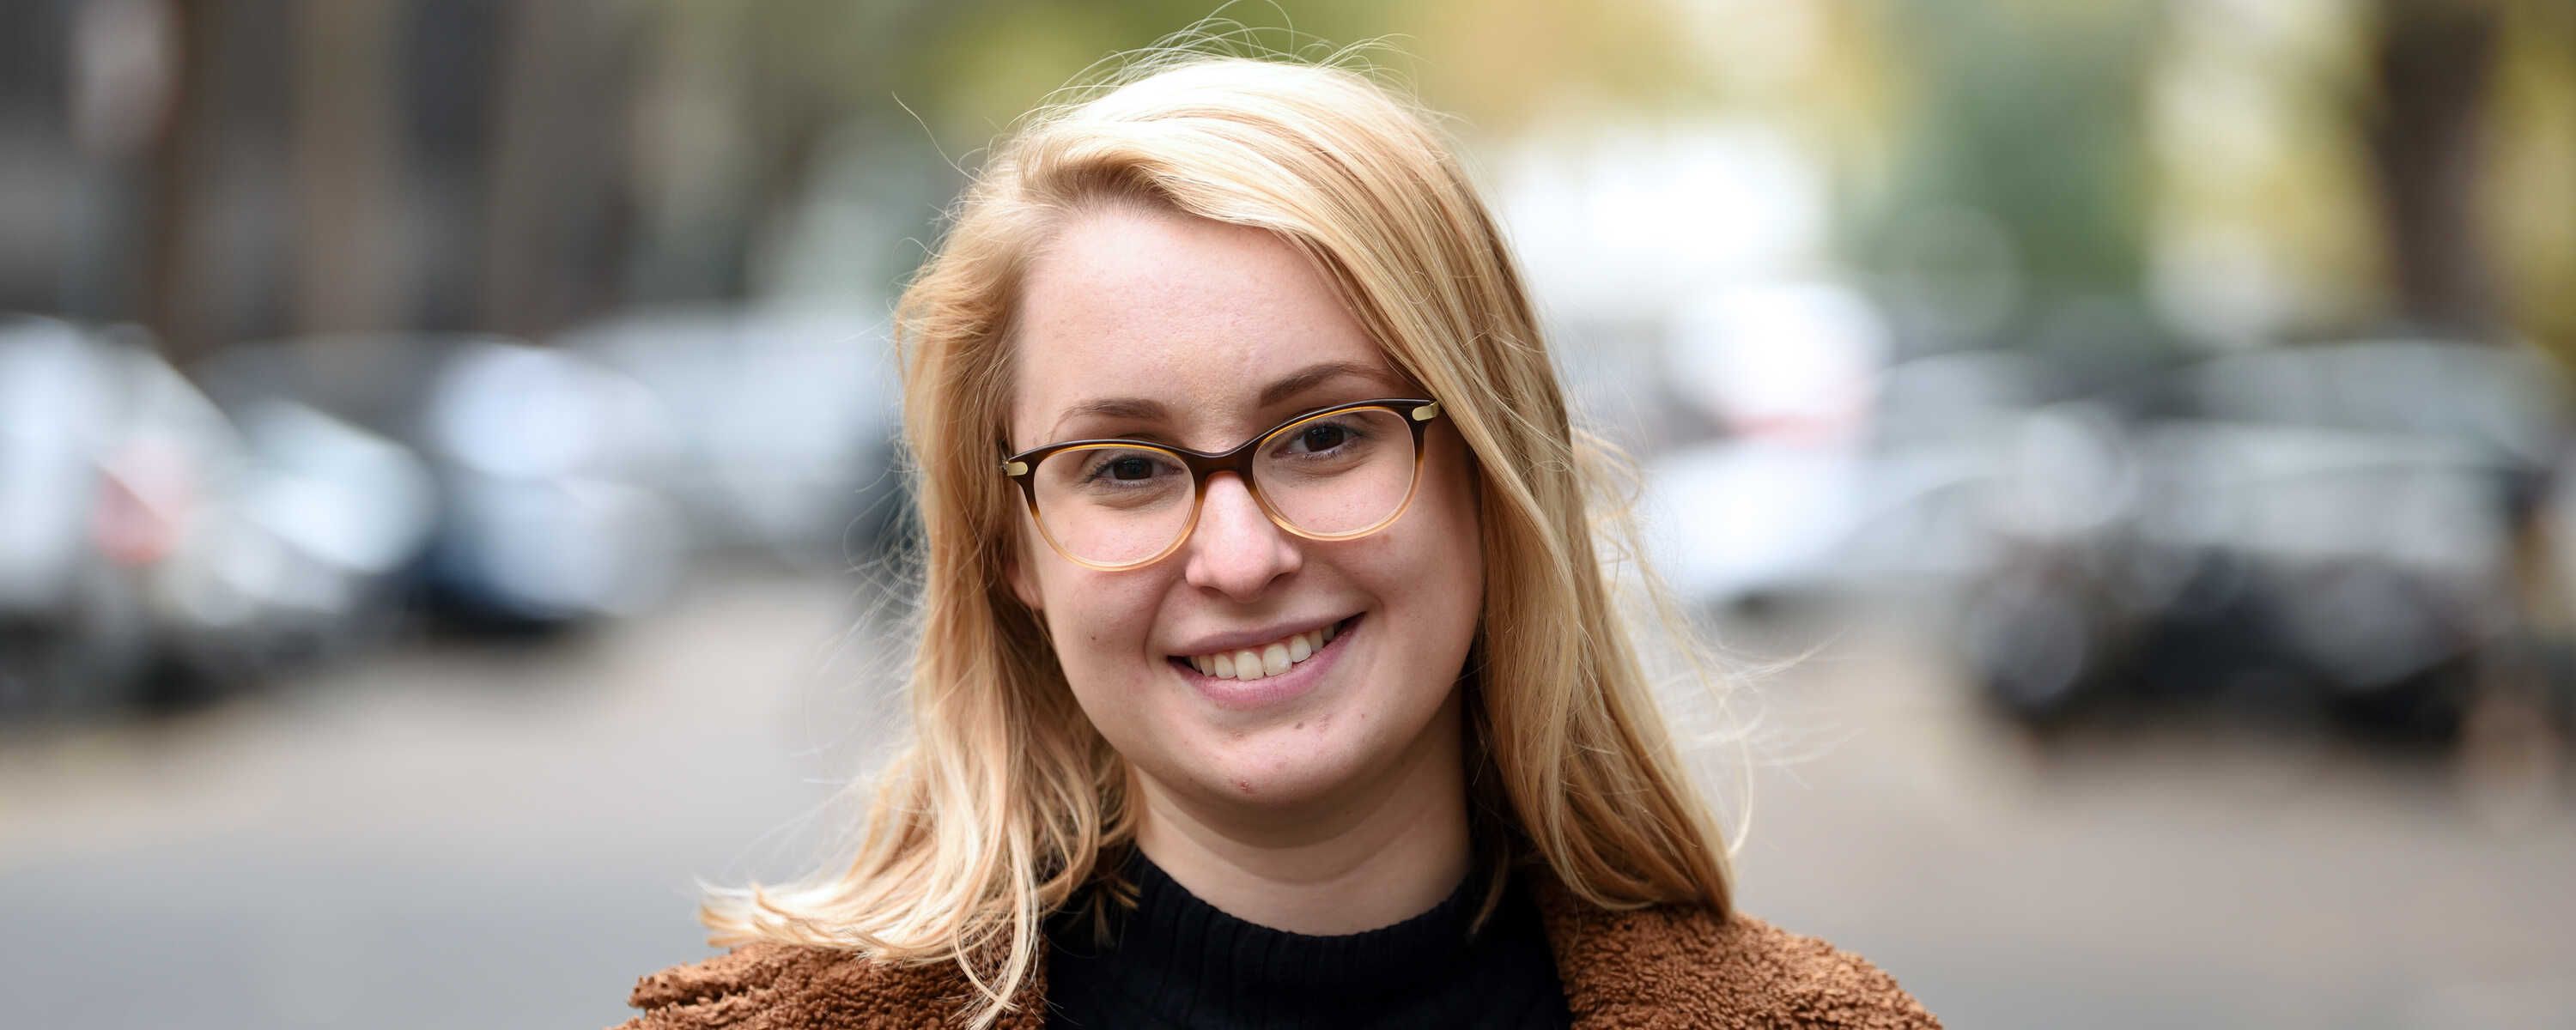 A portrait of Hannah Kay, one of the DeepMind scholars, smiling in the sunshine against a blurred background